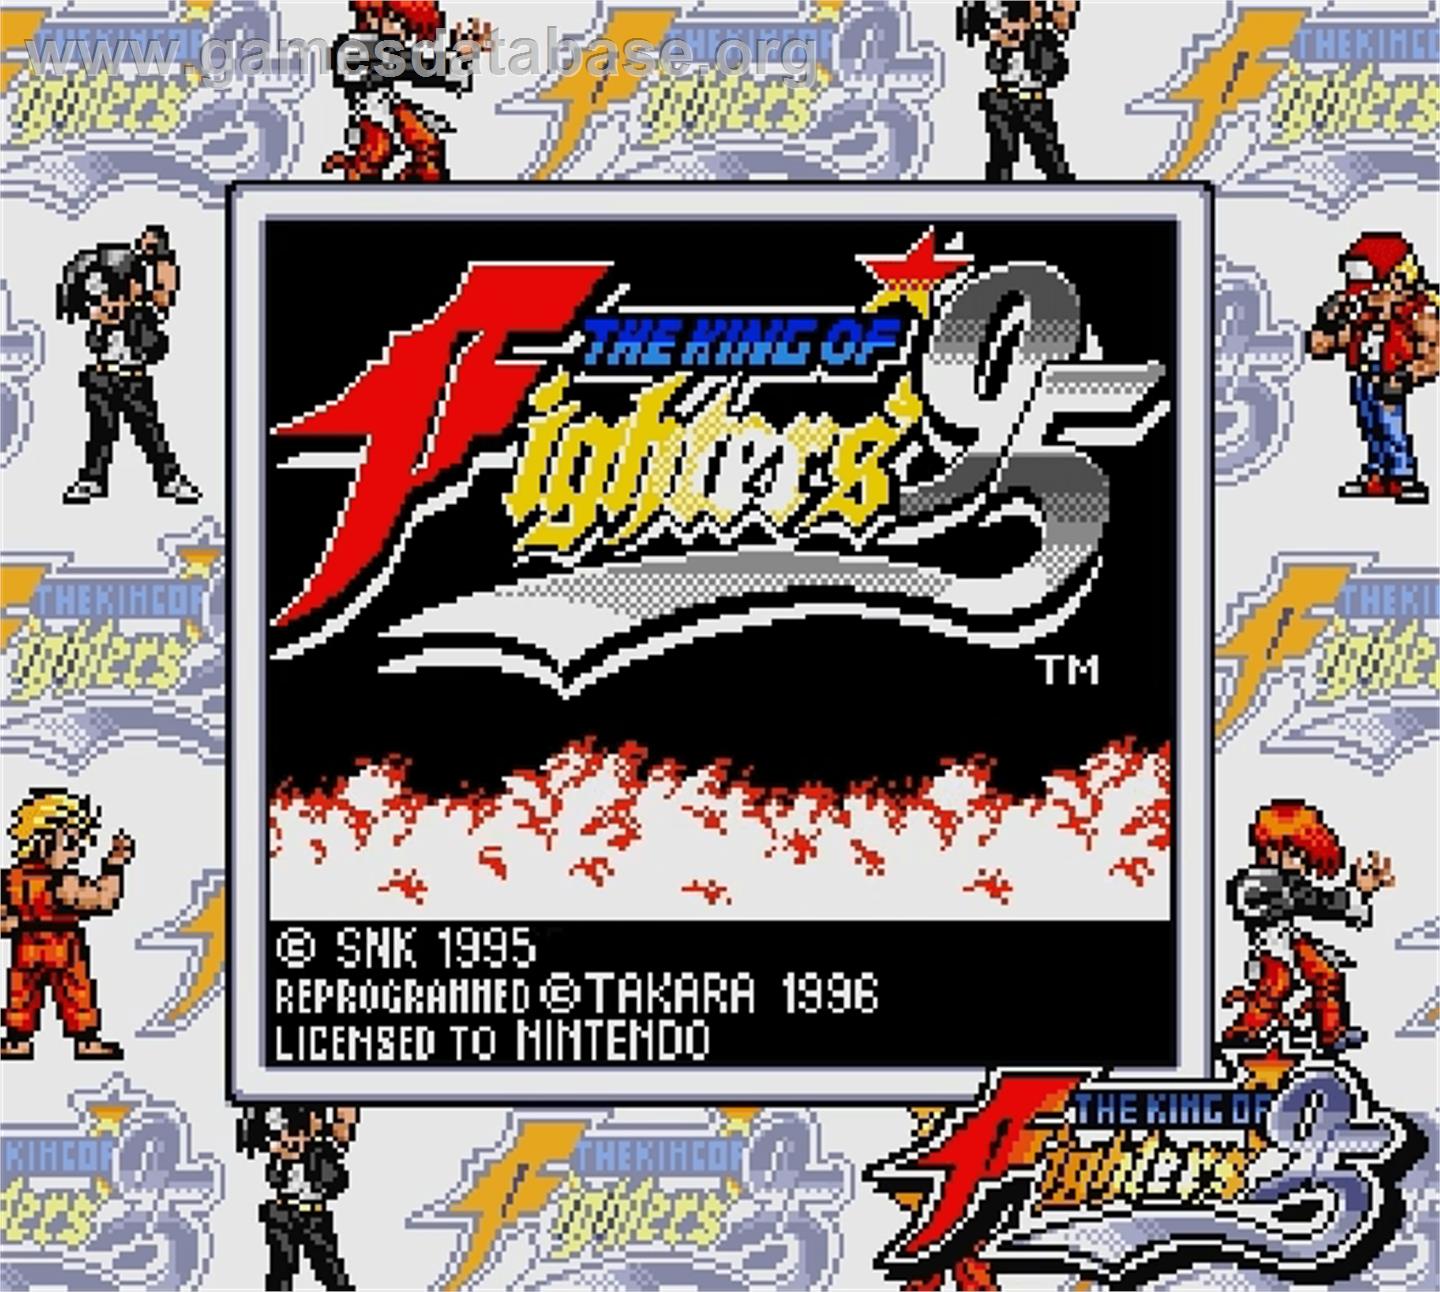 King of Fighters '95, The - Nintendo Super Gameboy - Artwork - Title Screen